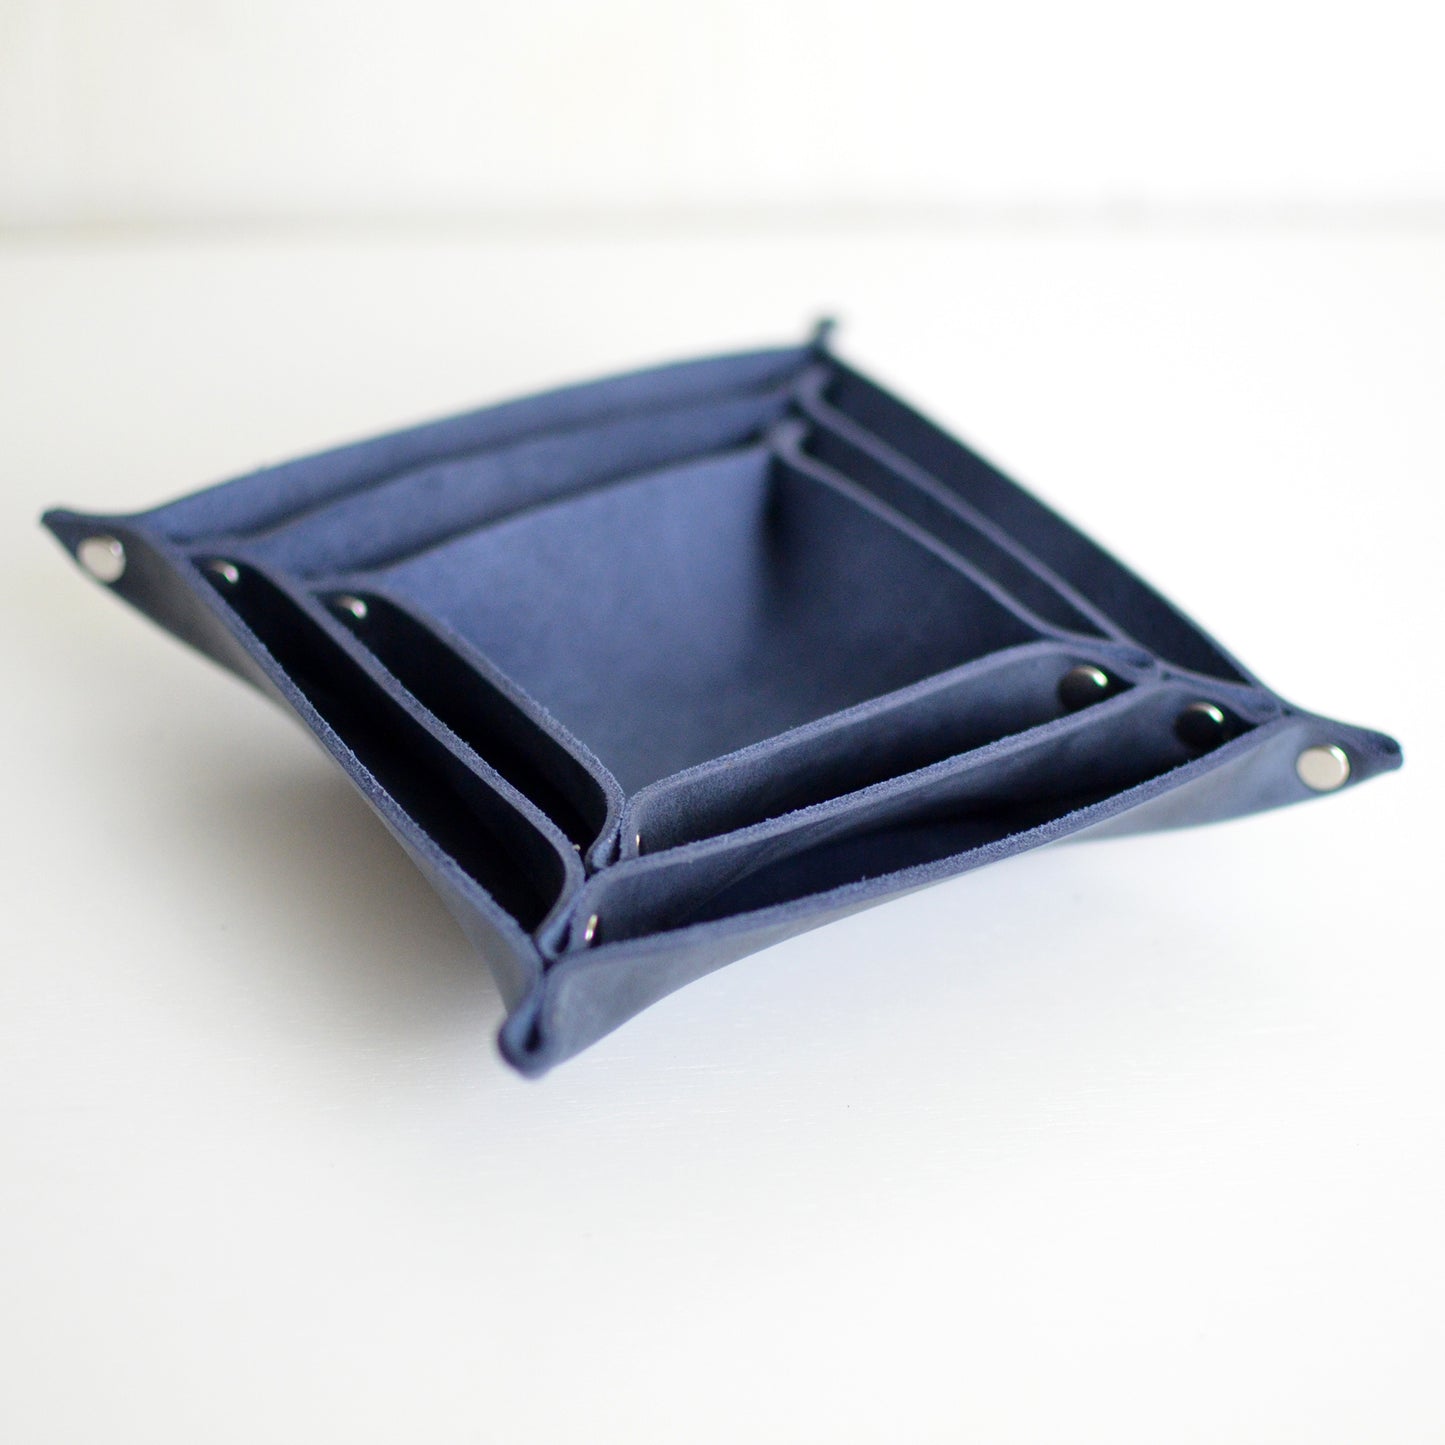 3 Stacking Trays - Navy Blue Leather